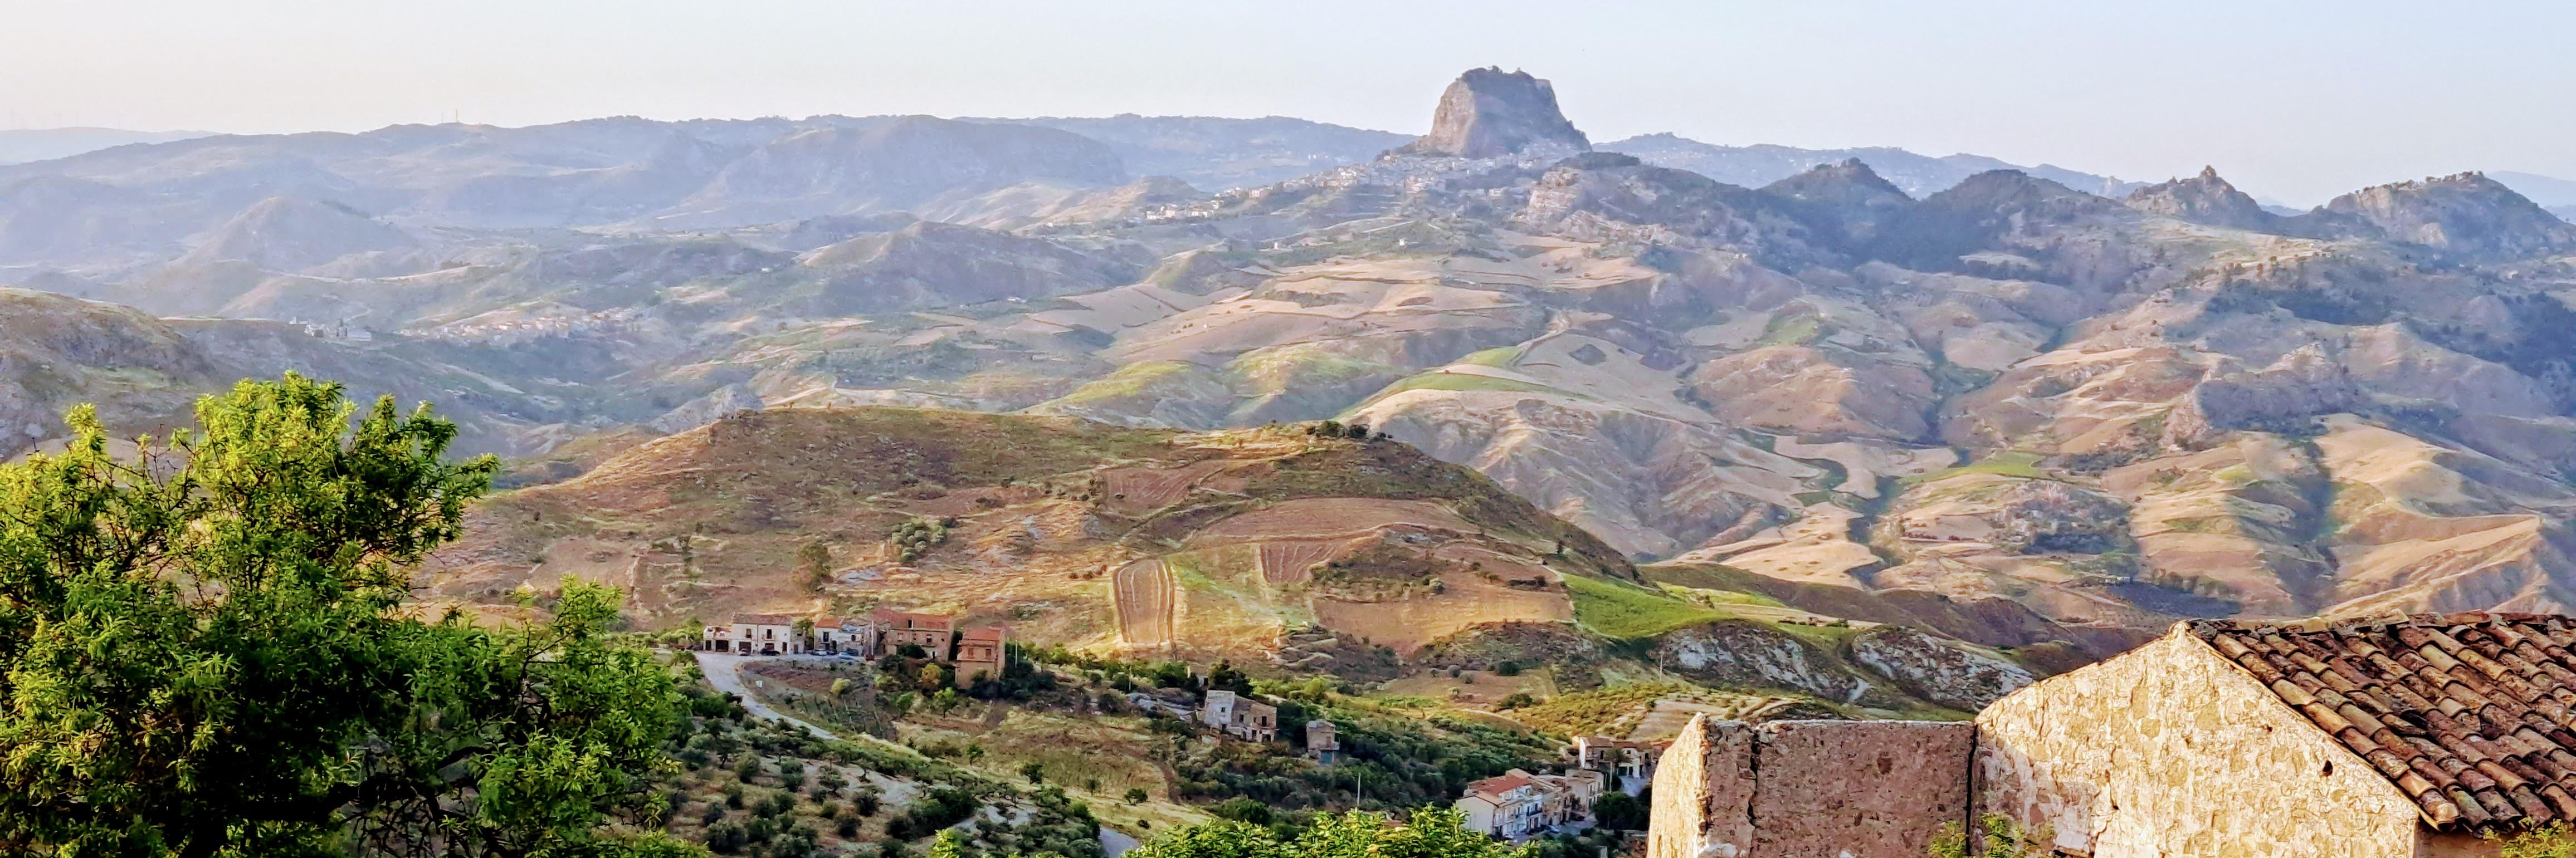 The Sardinian countryside on a bright summer's day with a small village and low rolling hills